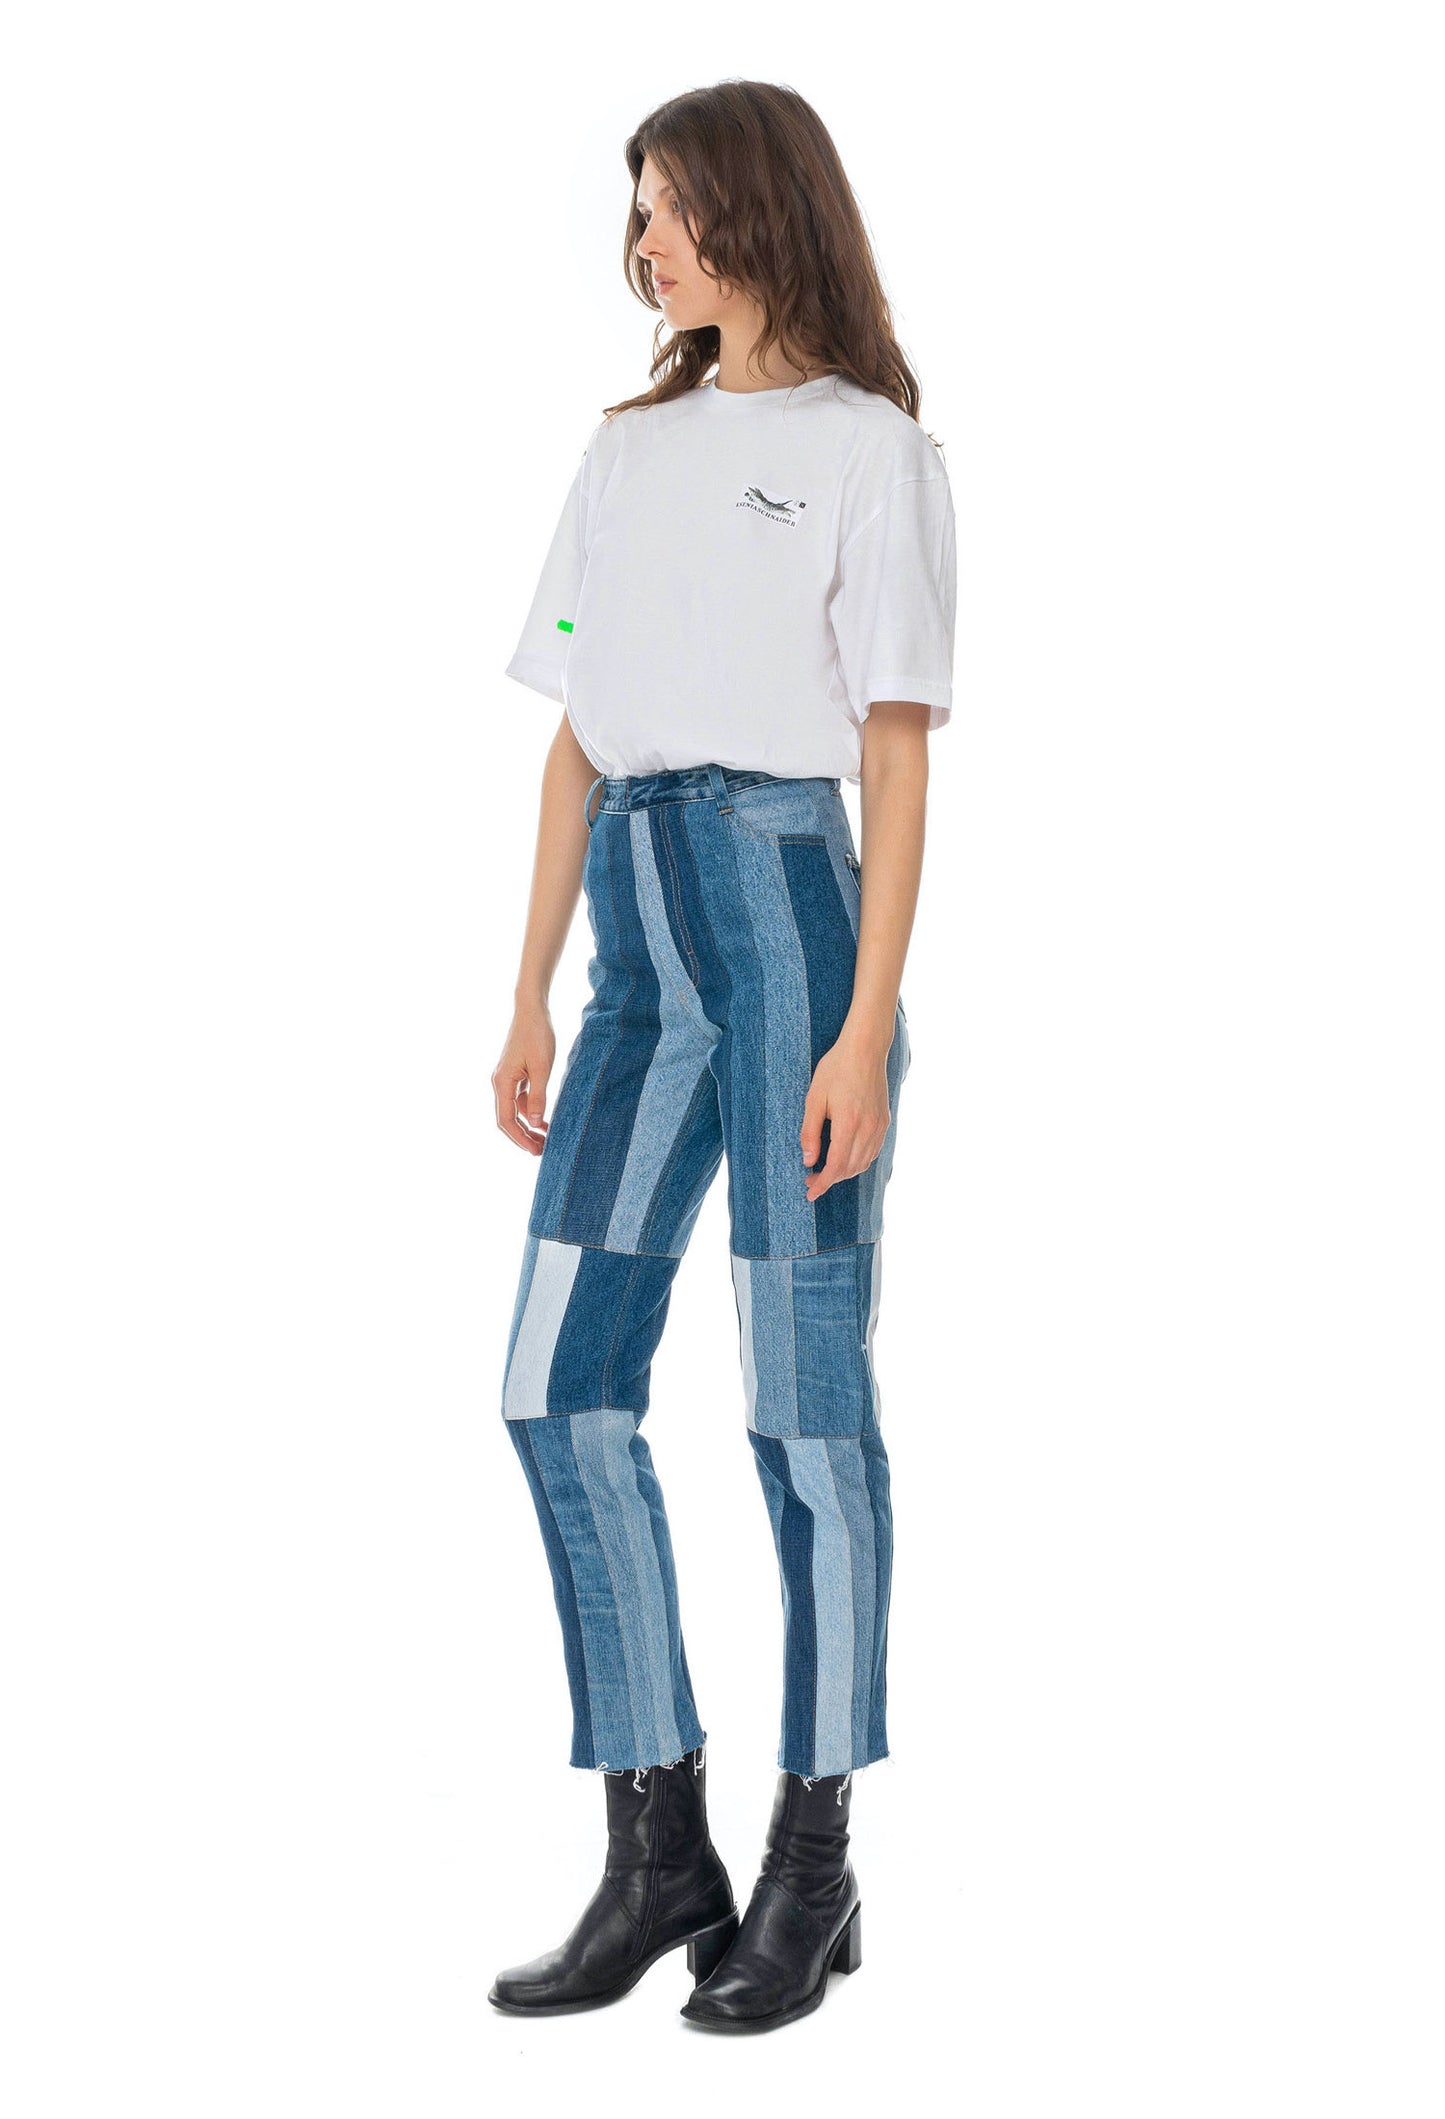 Reworked Striped Mom Jeans